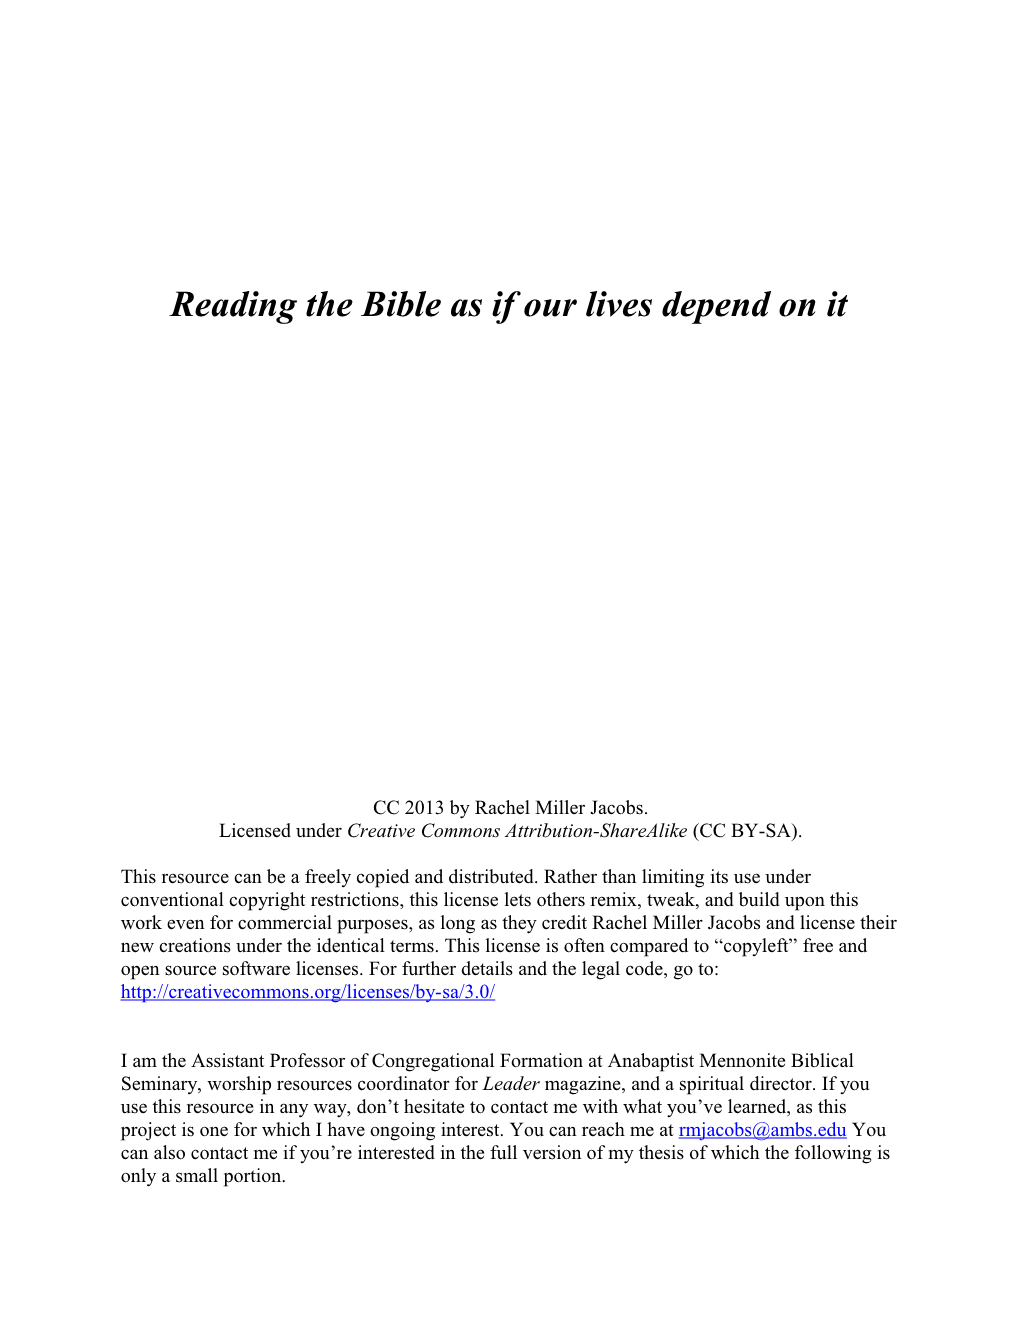 Reading the Bible As If Our Lives Depend on It